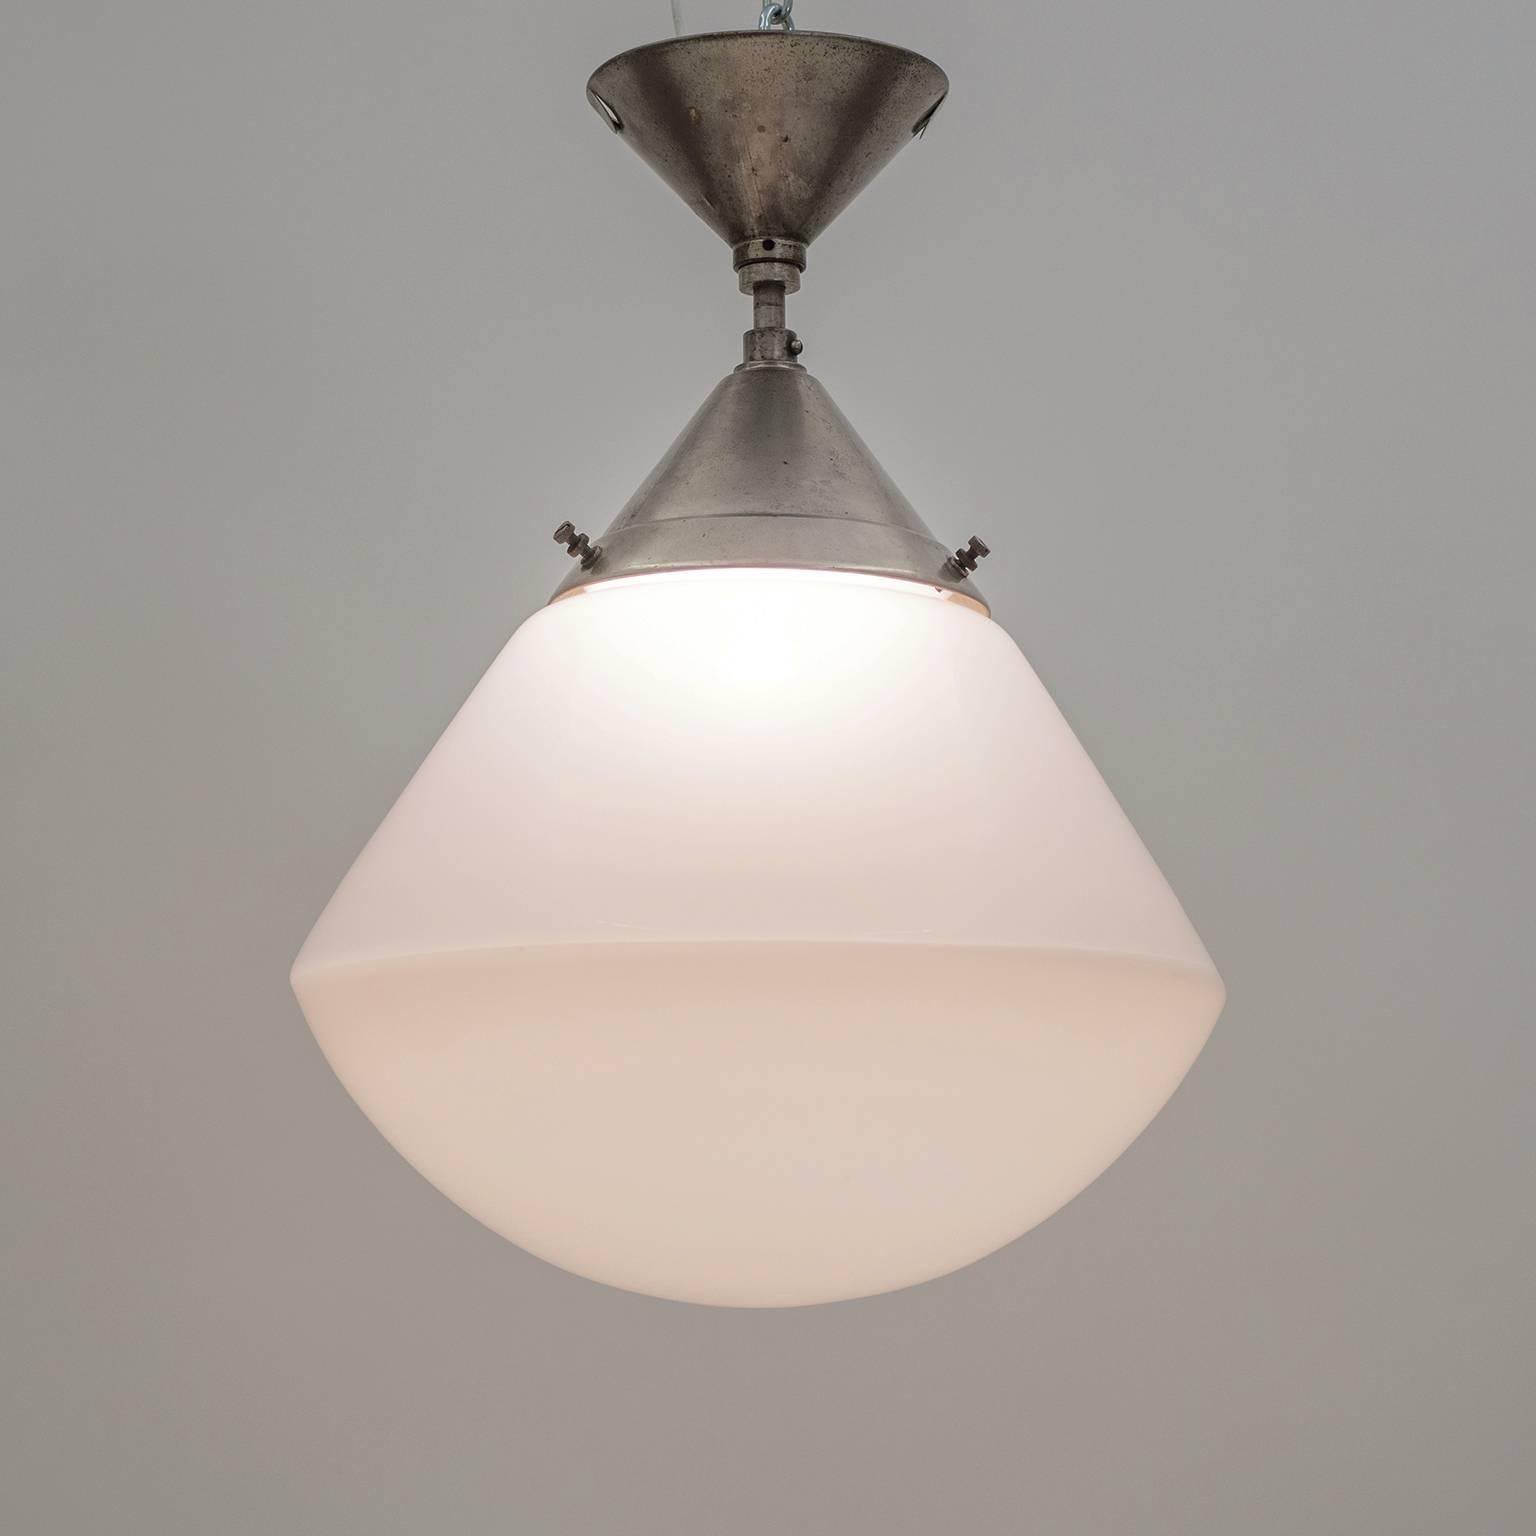 Mid-20th Century Rare Large Nickel and Glass Kandem Ceiling Light, 1930s